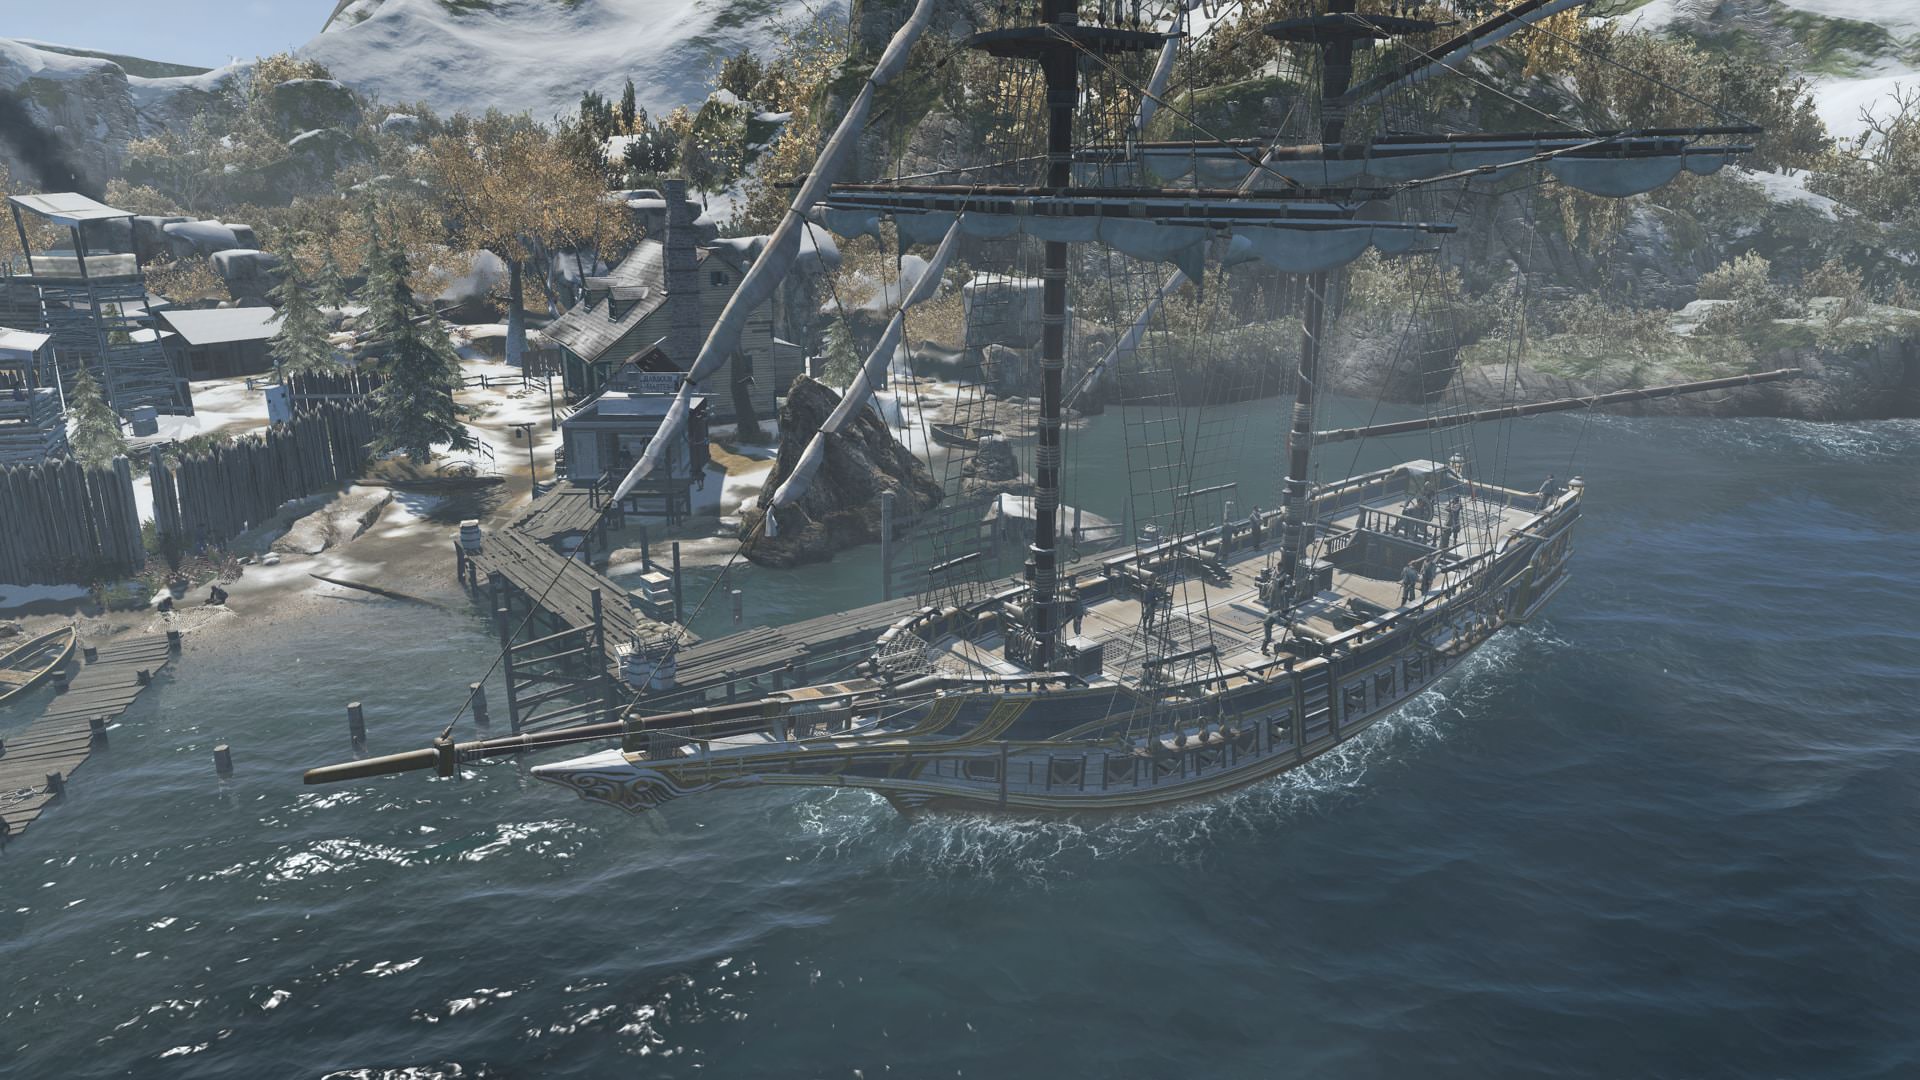 Assassin's Creed: Rogue – Remastered Review